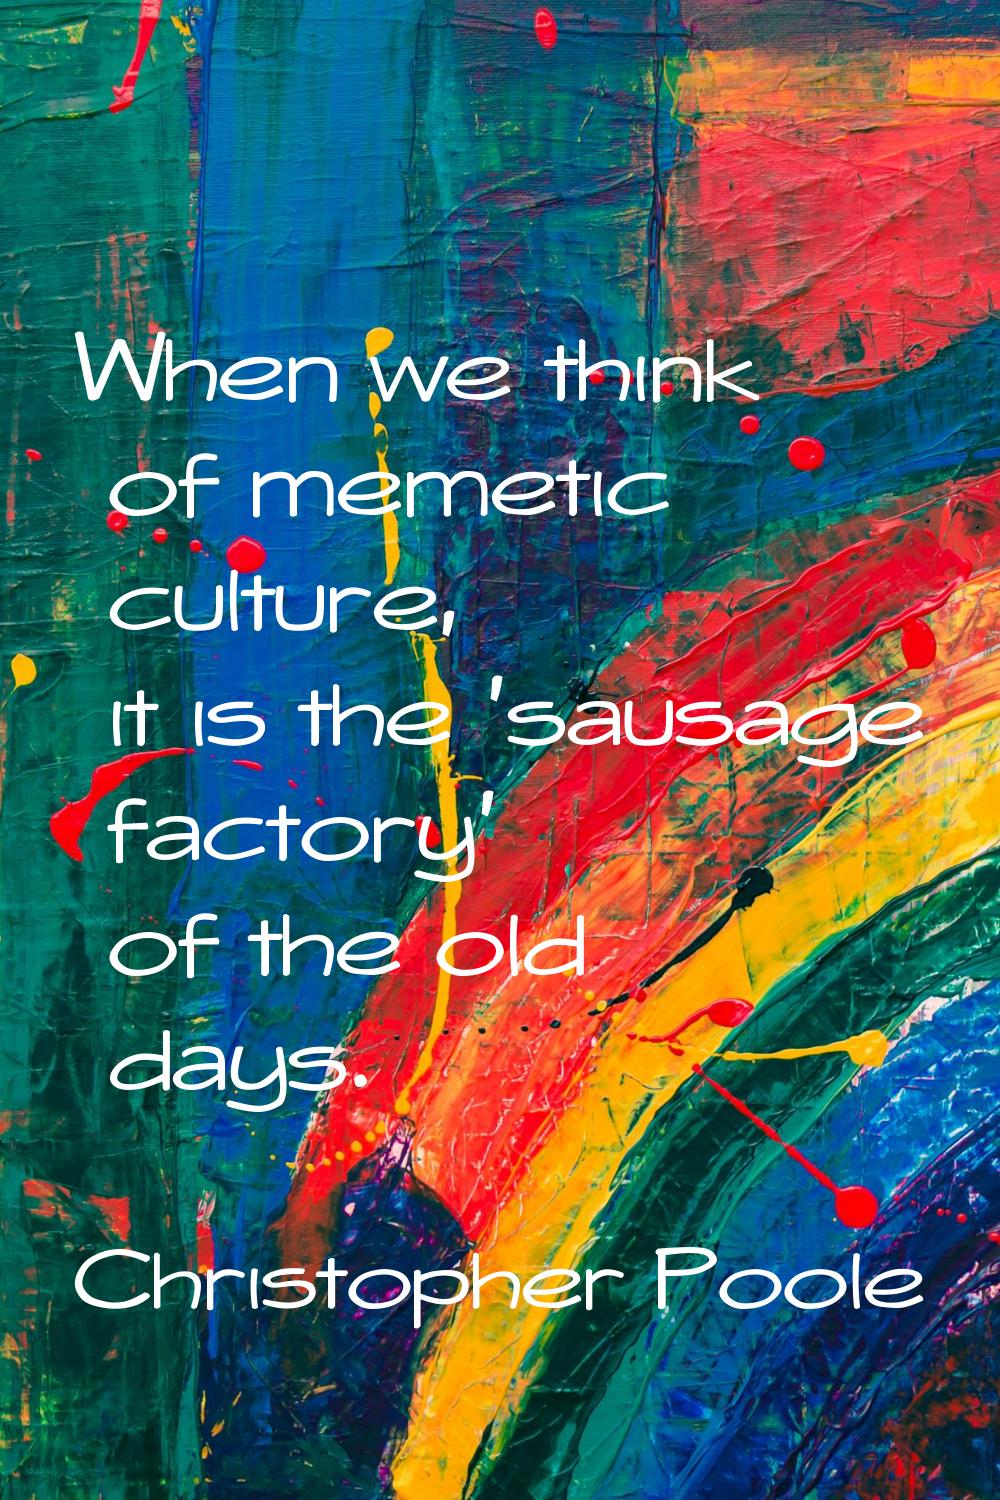 When we think of memetic culture, it is the 'sausage factory' of the old days.